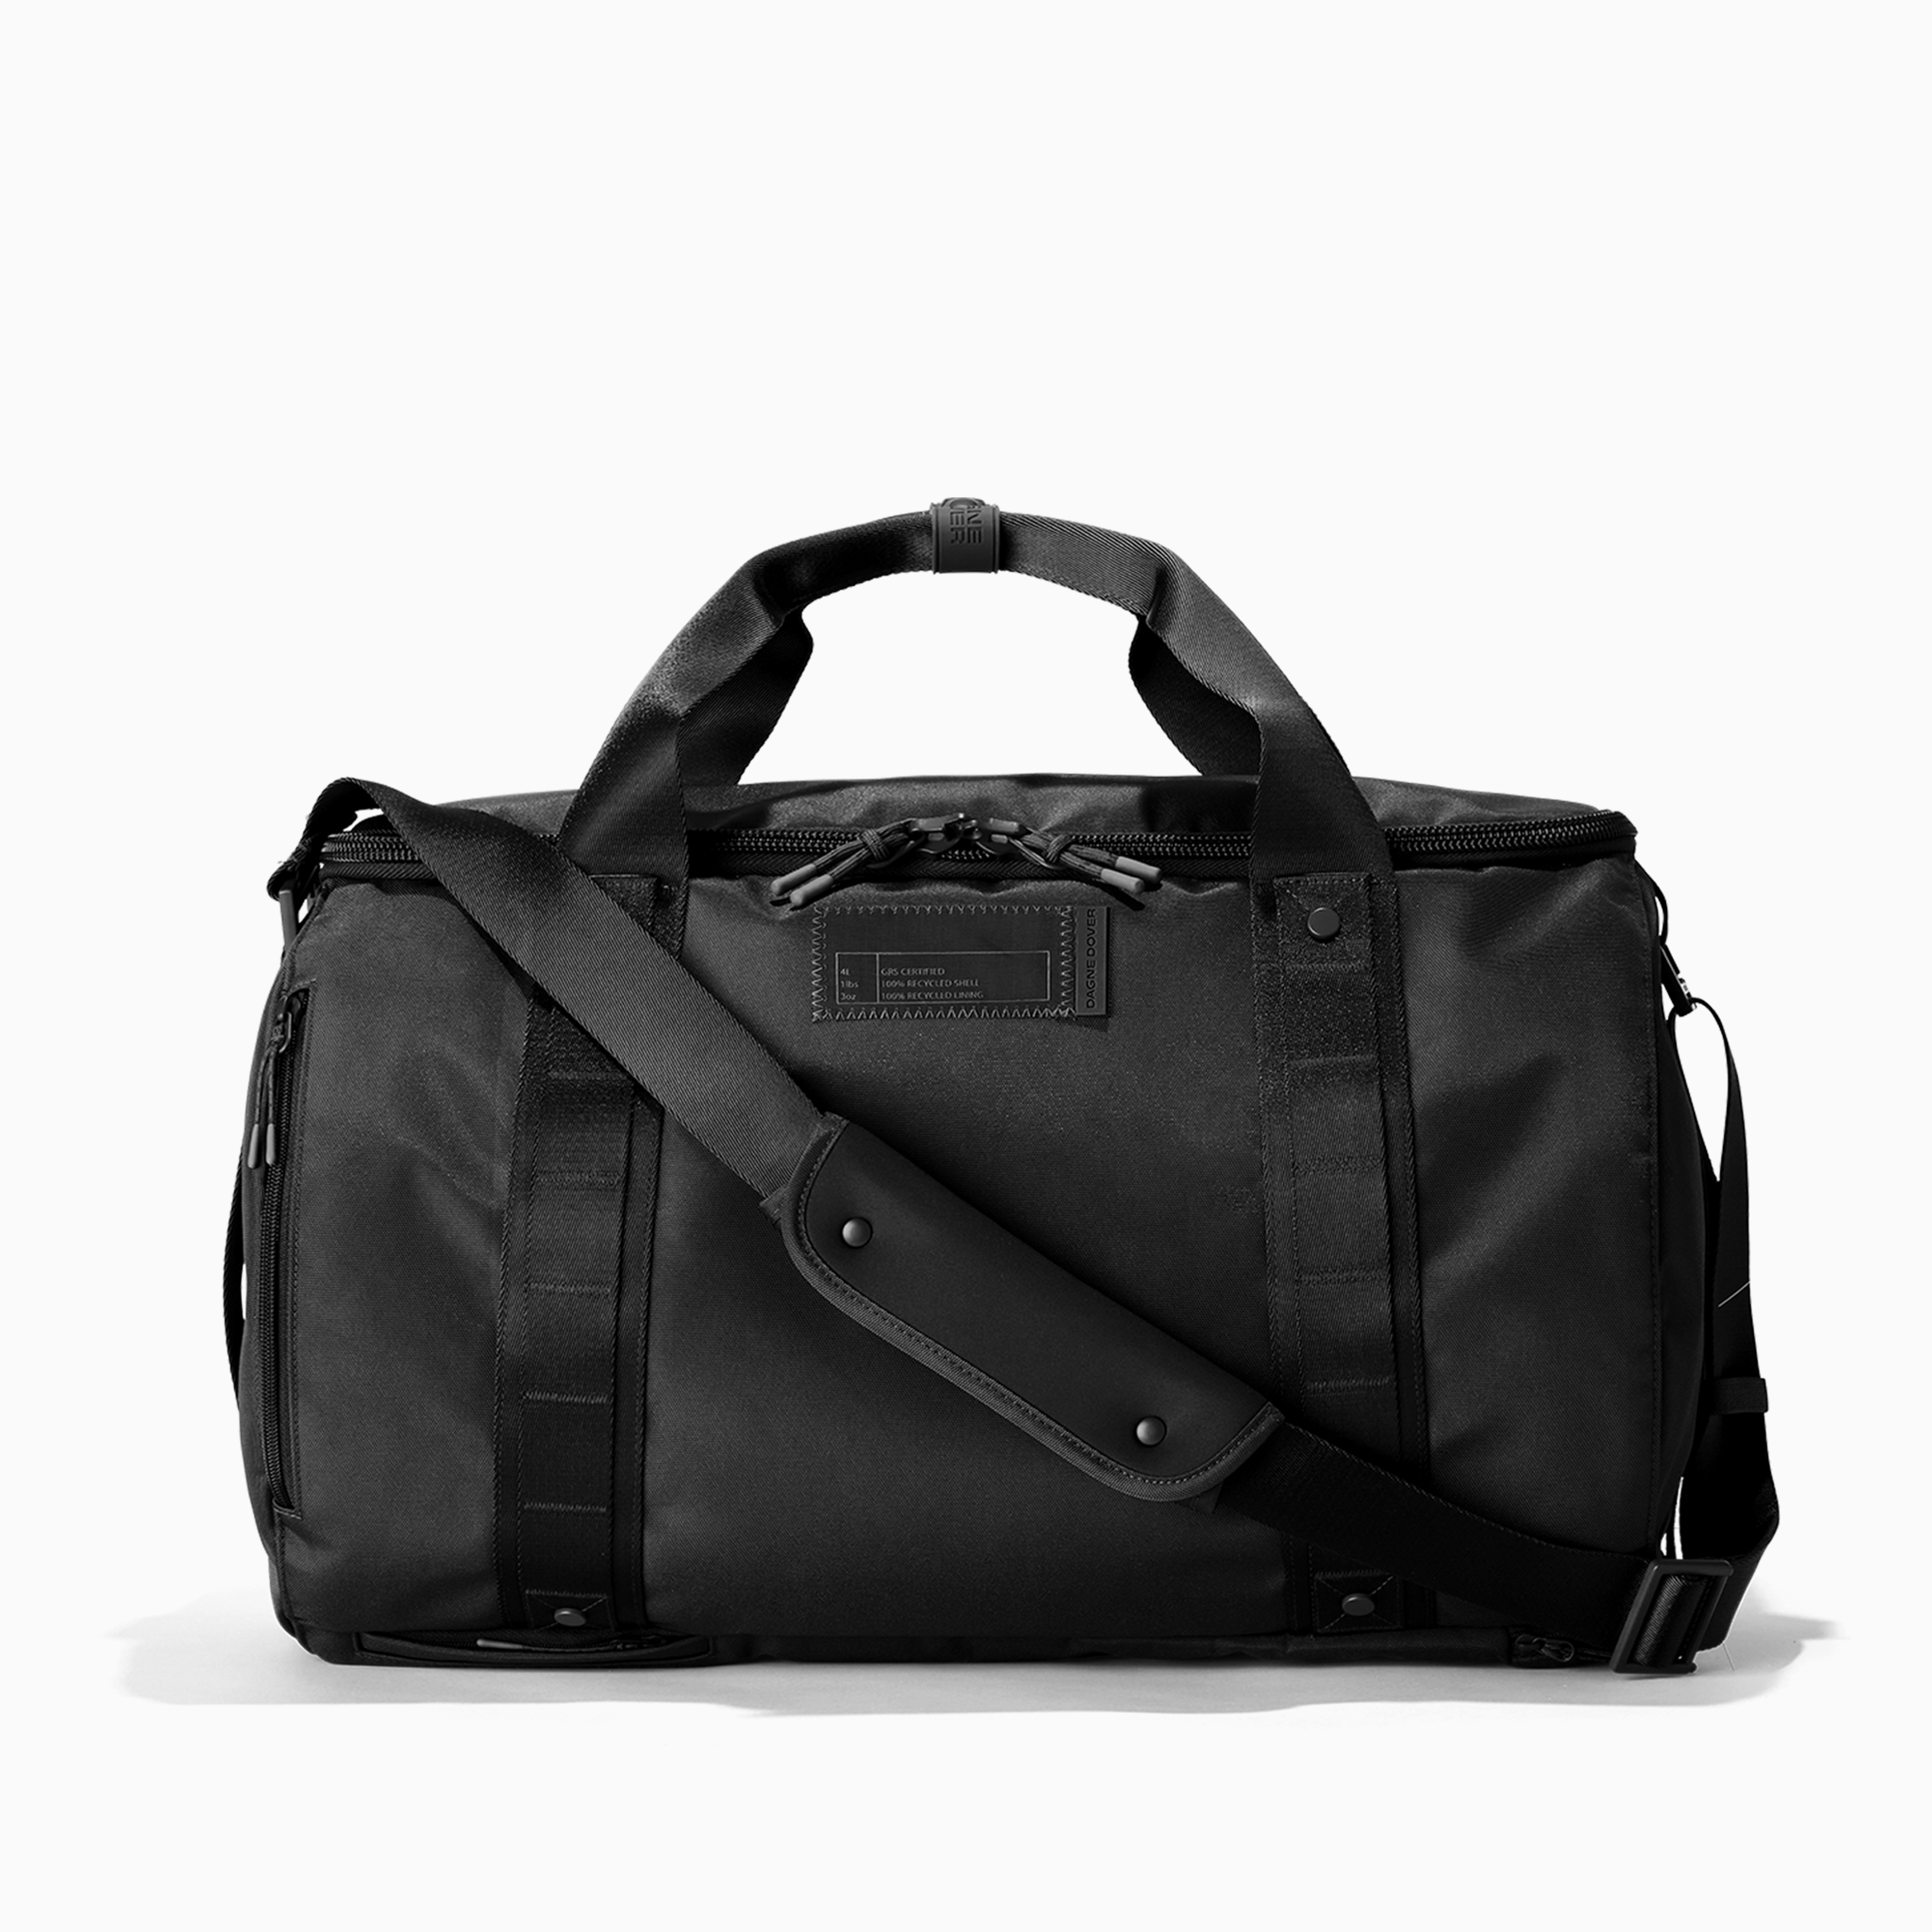 Lagos Convertible Duffle in Onyx, Large